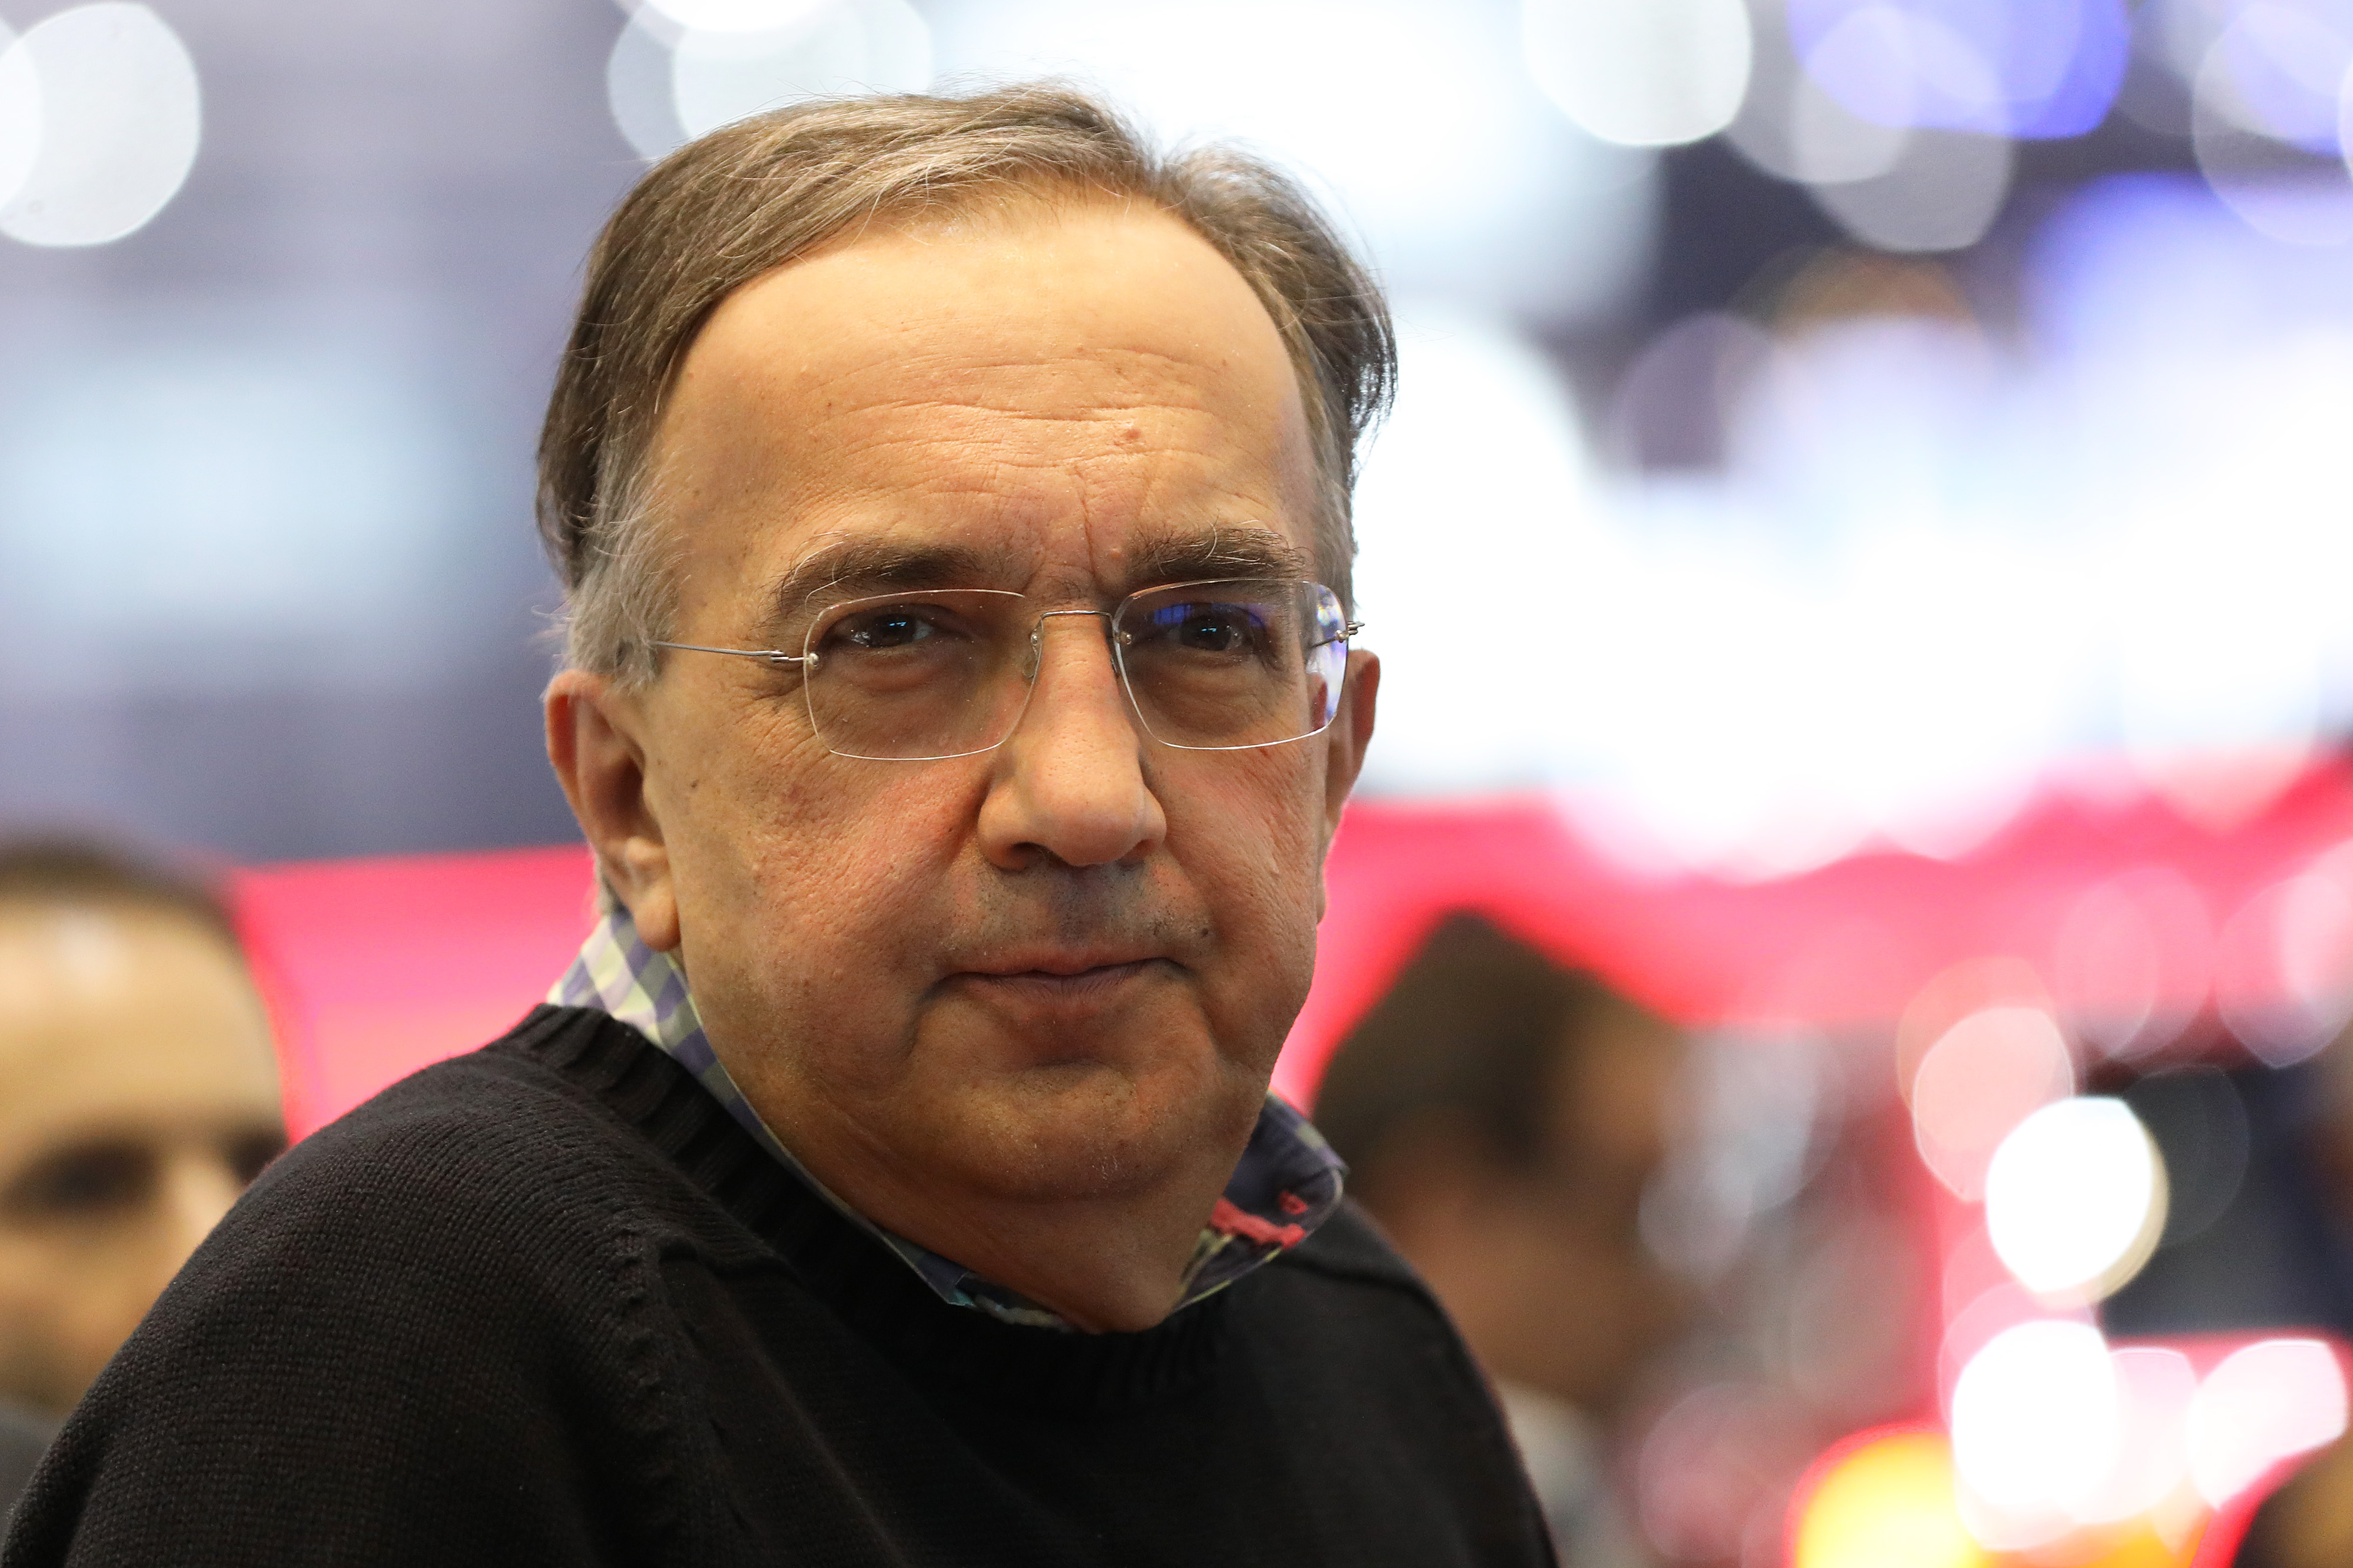 Sergio Marchionne, chief executive officer of Fiat Chrysler Automobiles NV, looks on during a launch event on the first day of the 87th Geneva International Motor Show in Geneva, Switzerland, on Tuesday, March 7, 2017. (Chris Ratcliffe&mdash;Bloomberg/Getty Images)